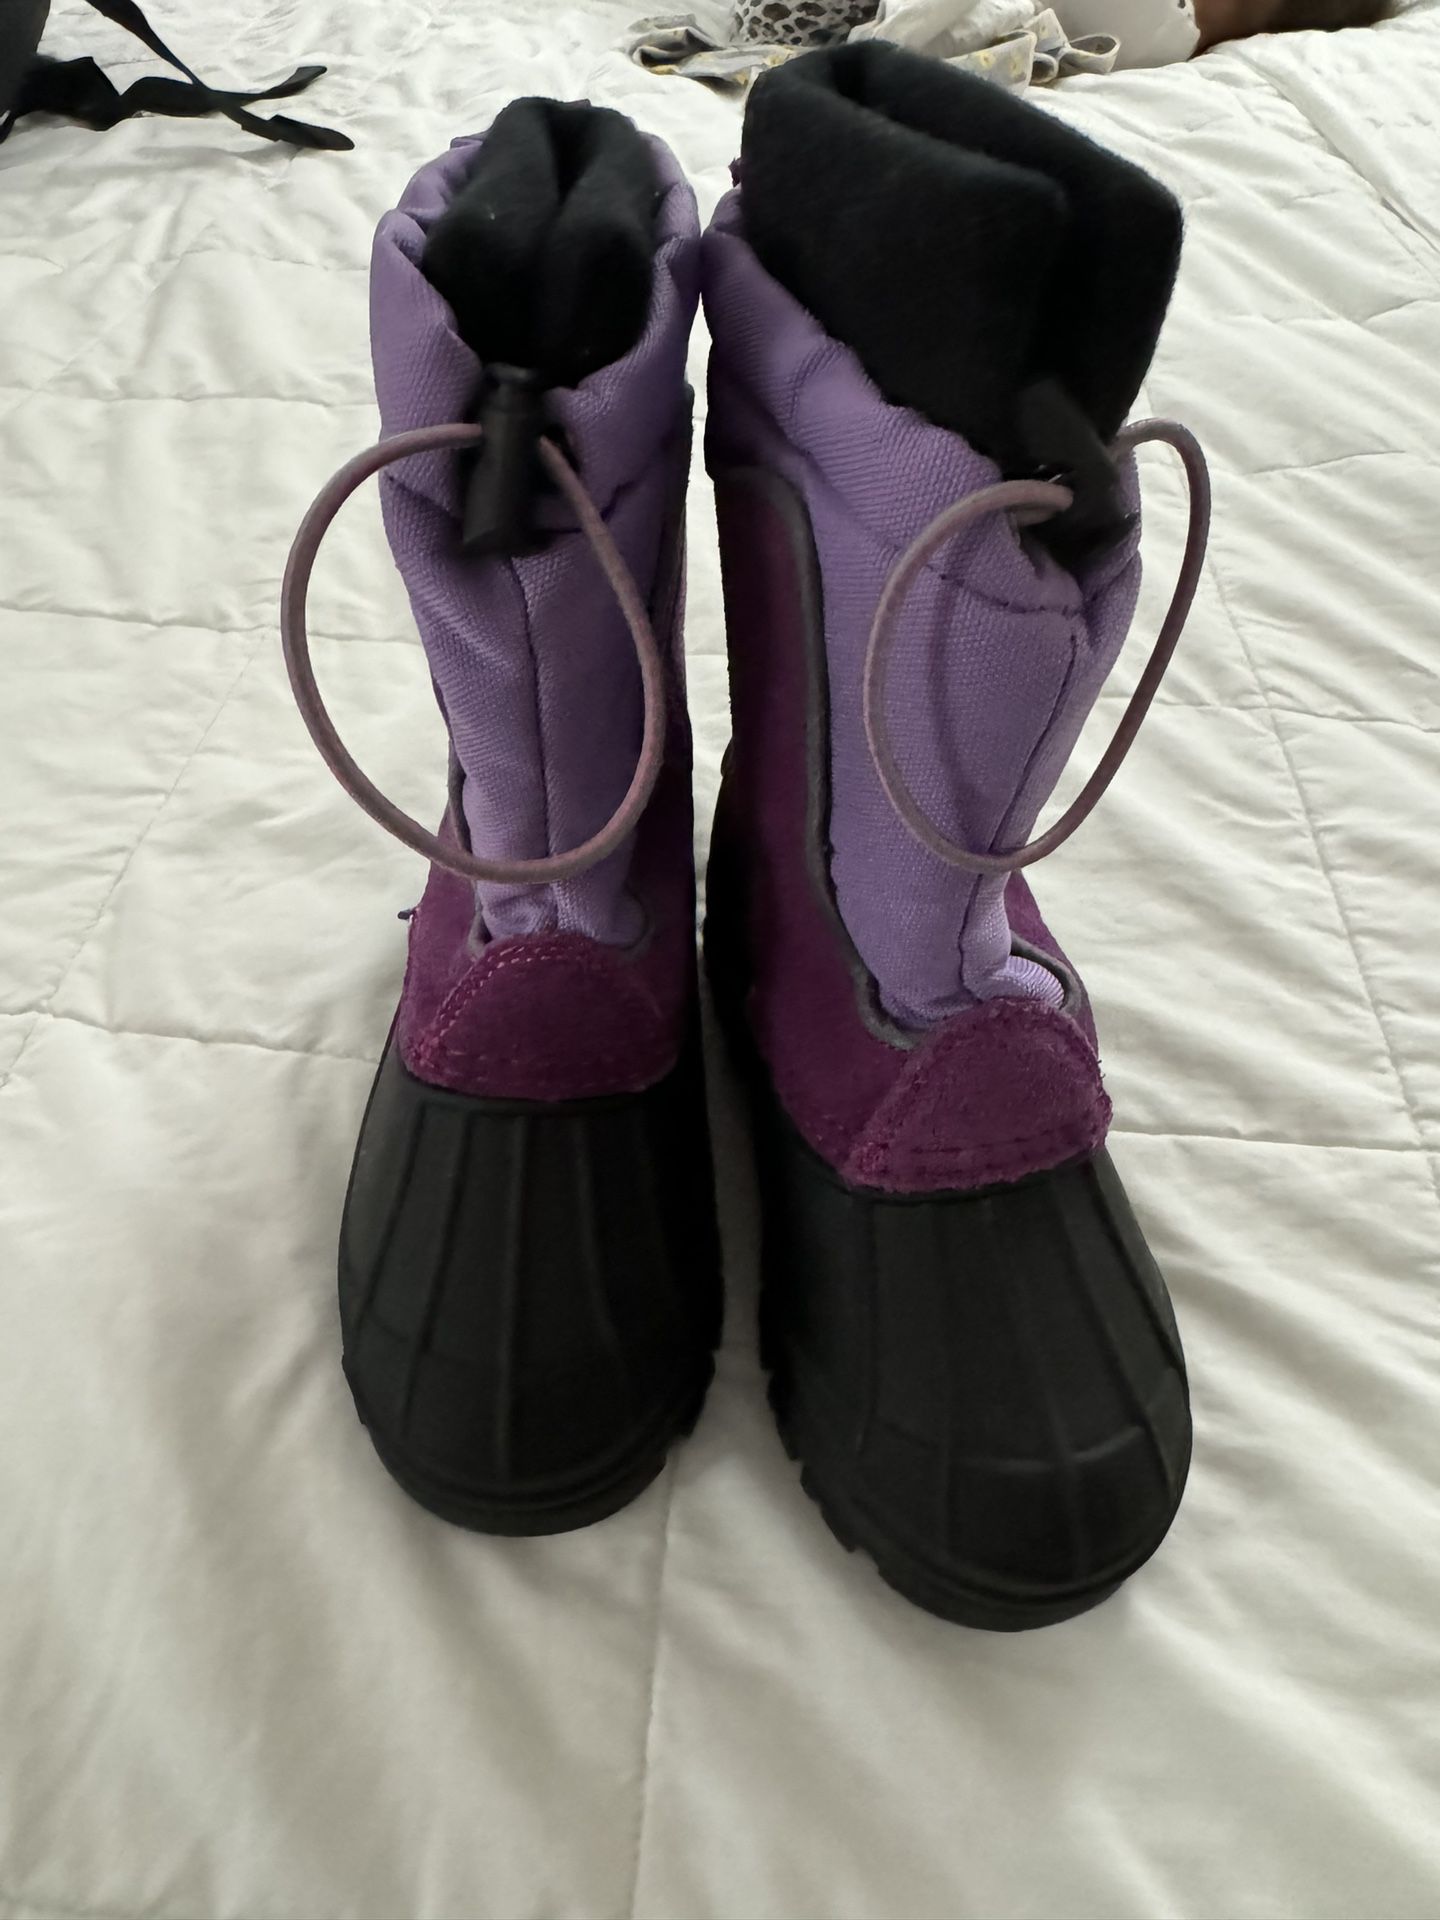 SNOW boots For Toddler 